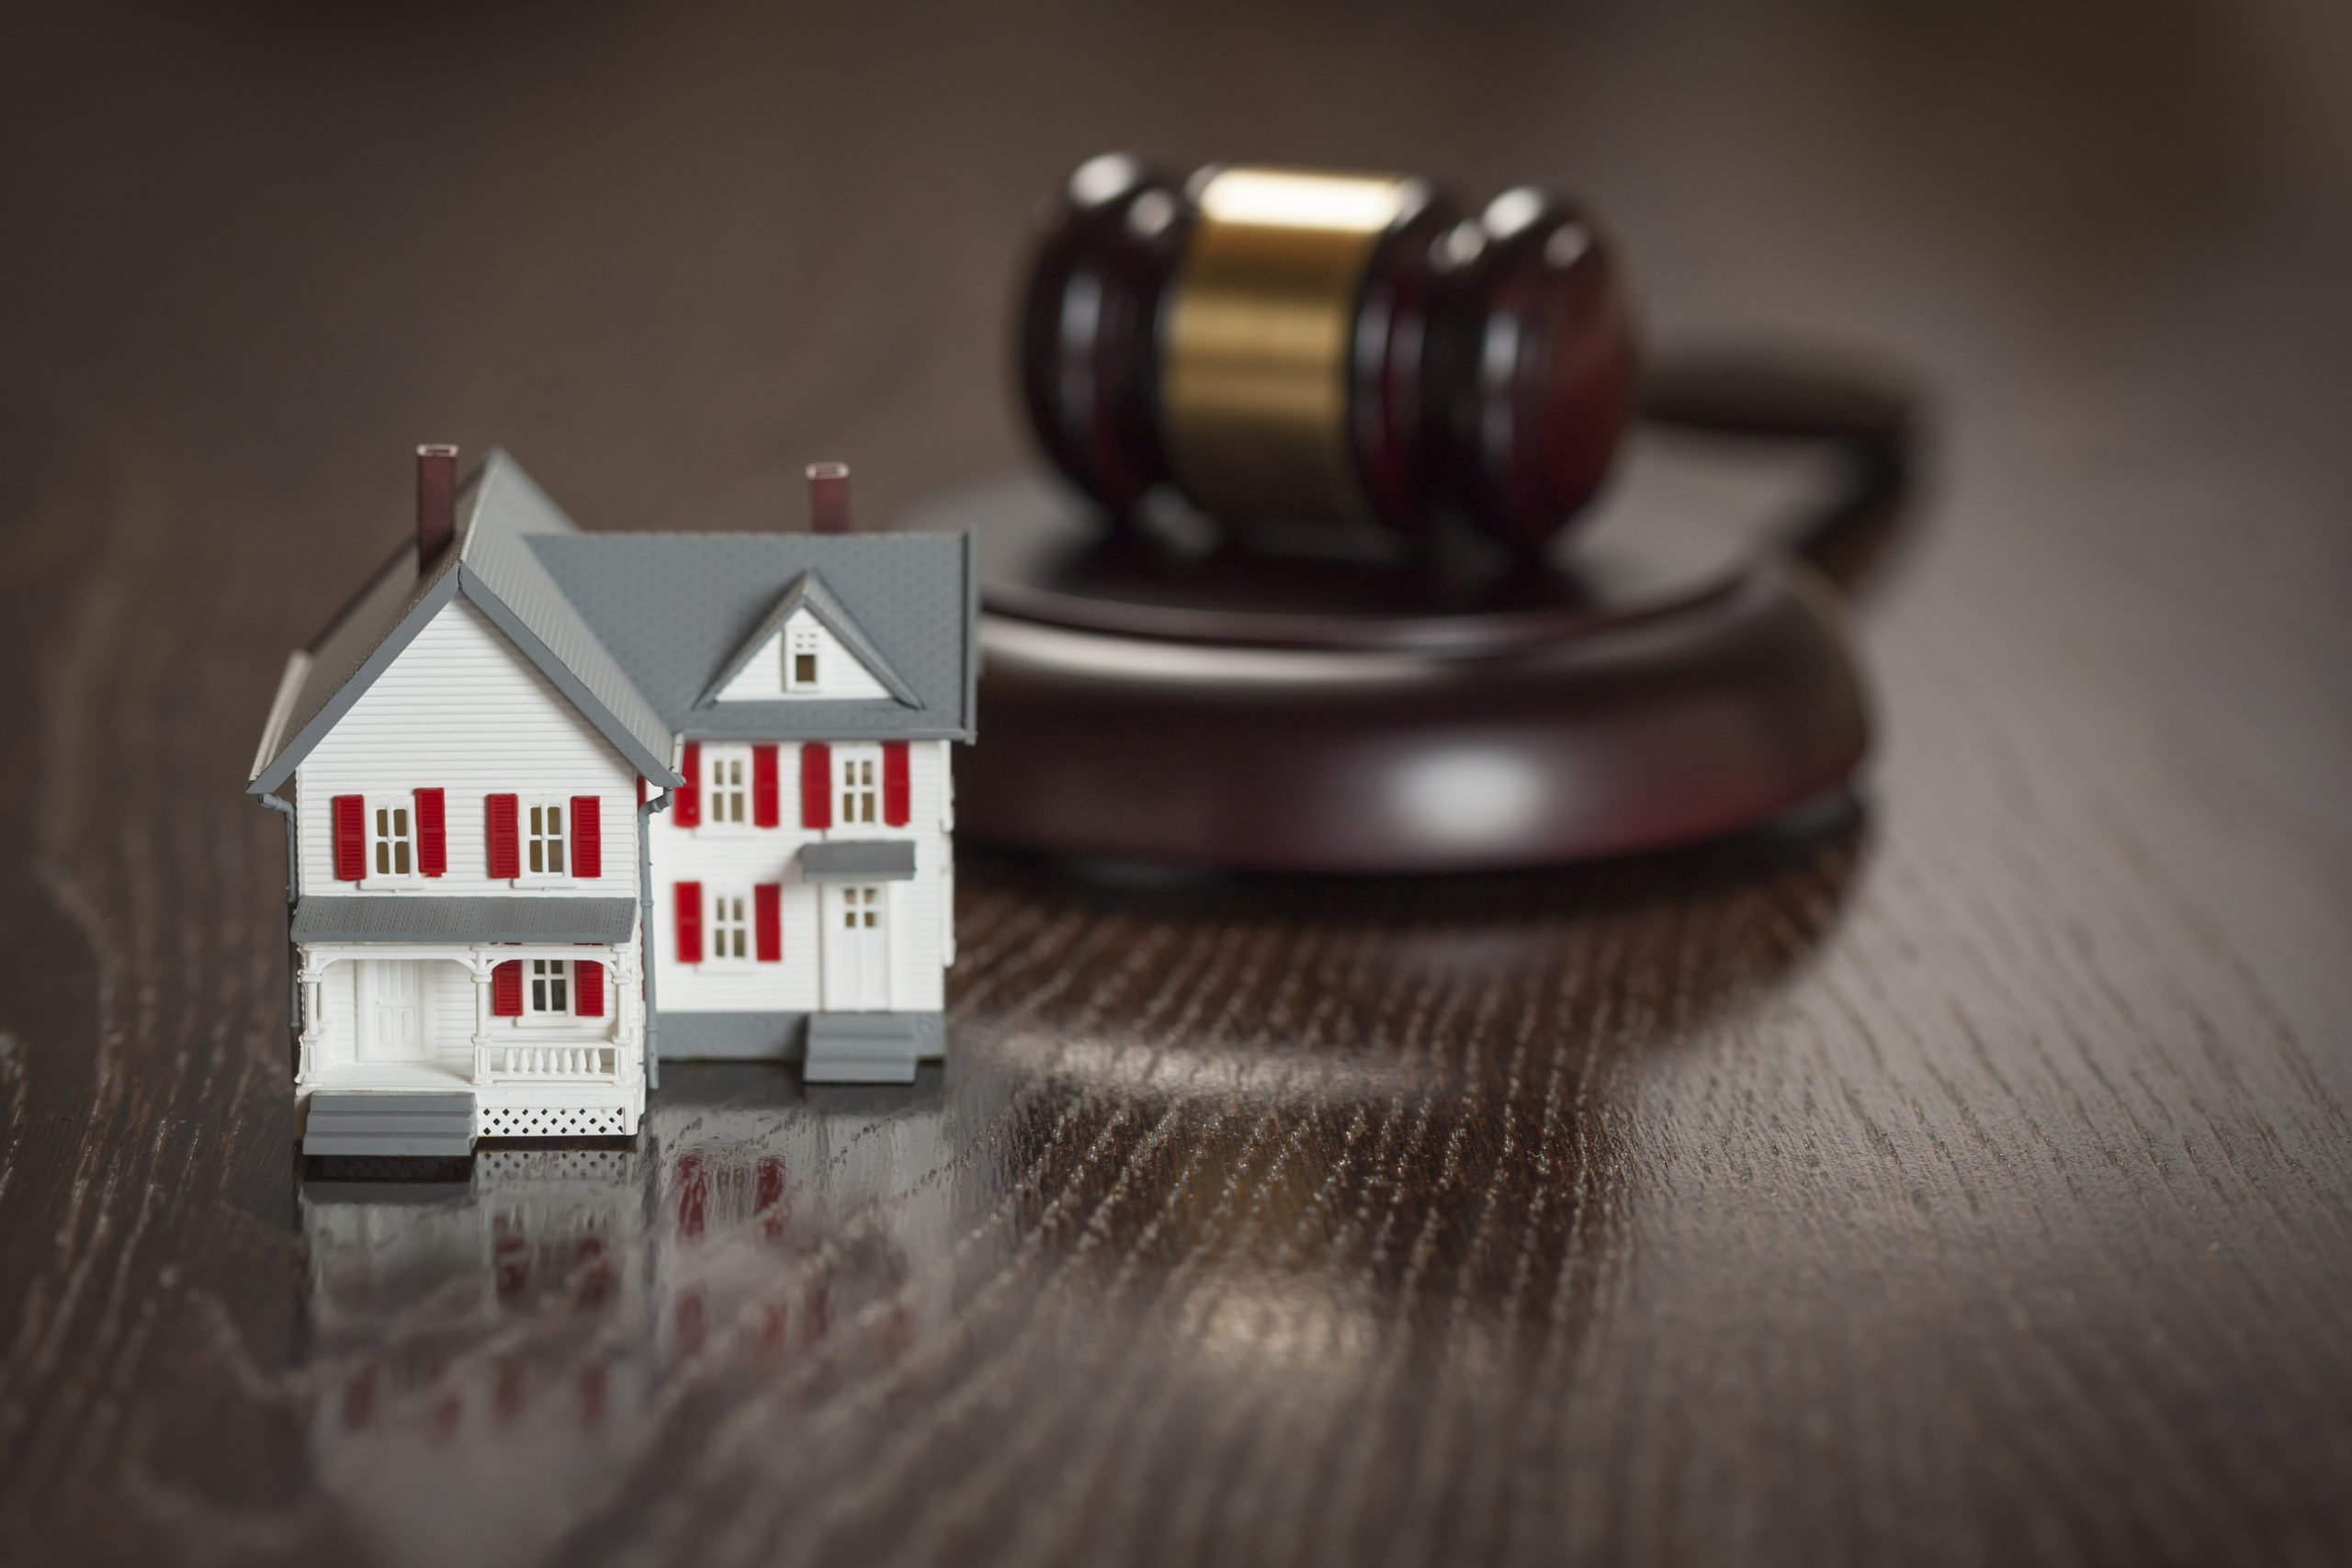 Gavel And Small Model House On Wooden Table